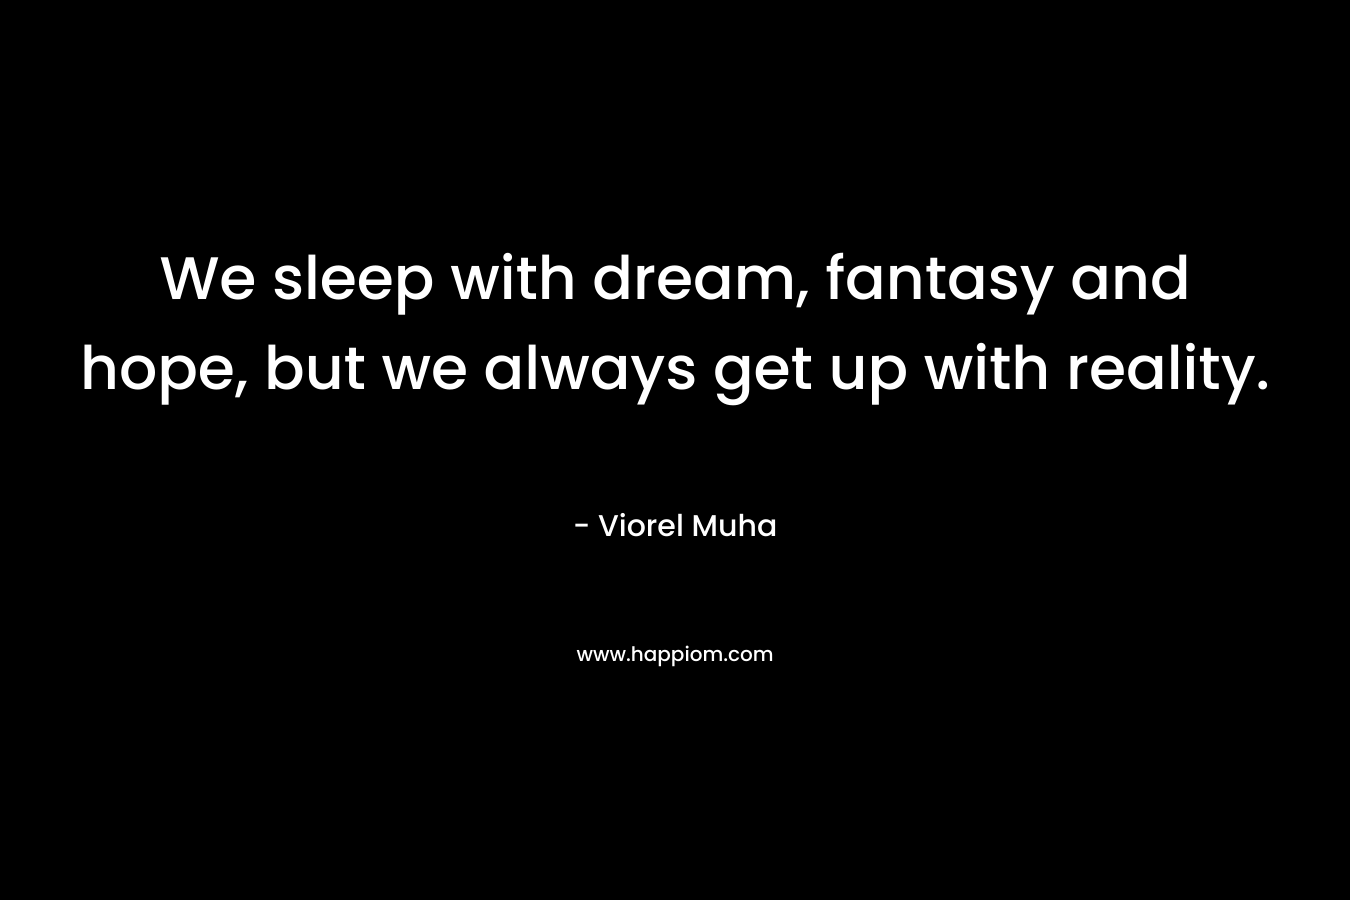 We sleep with dream, fantasy and hope, but we always get up with reality. – Viorel Muha